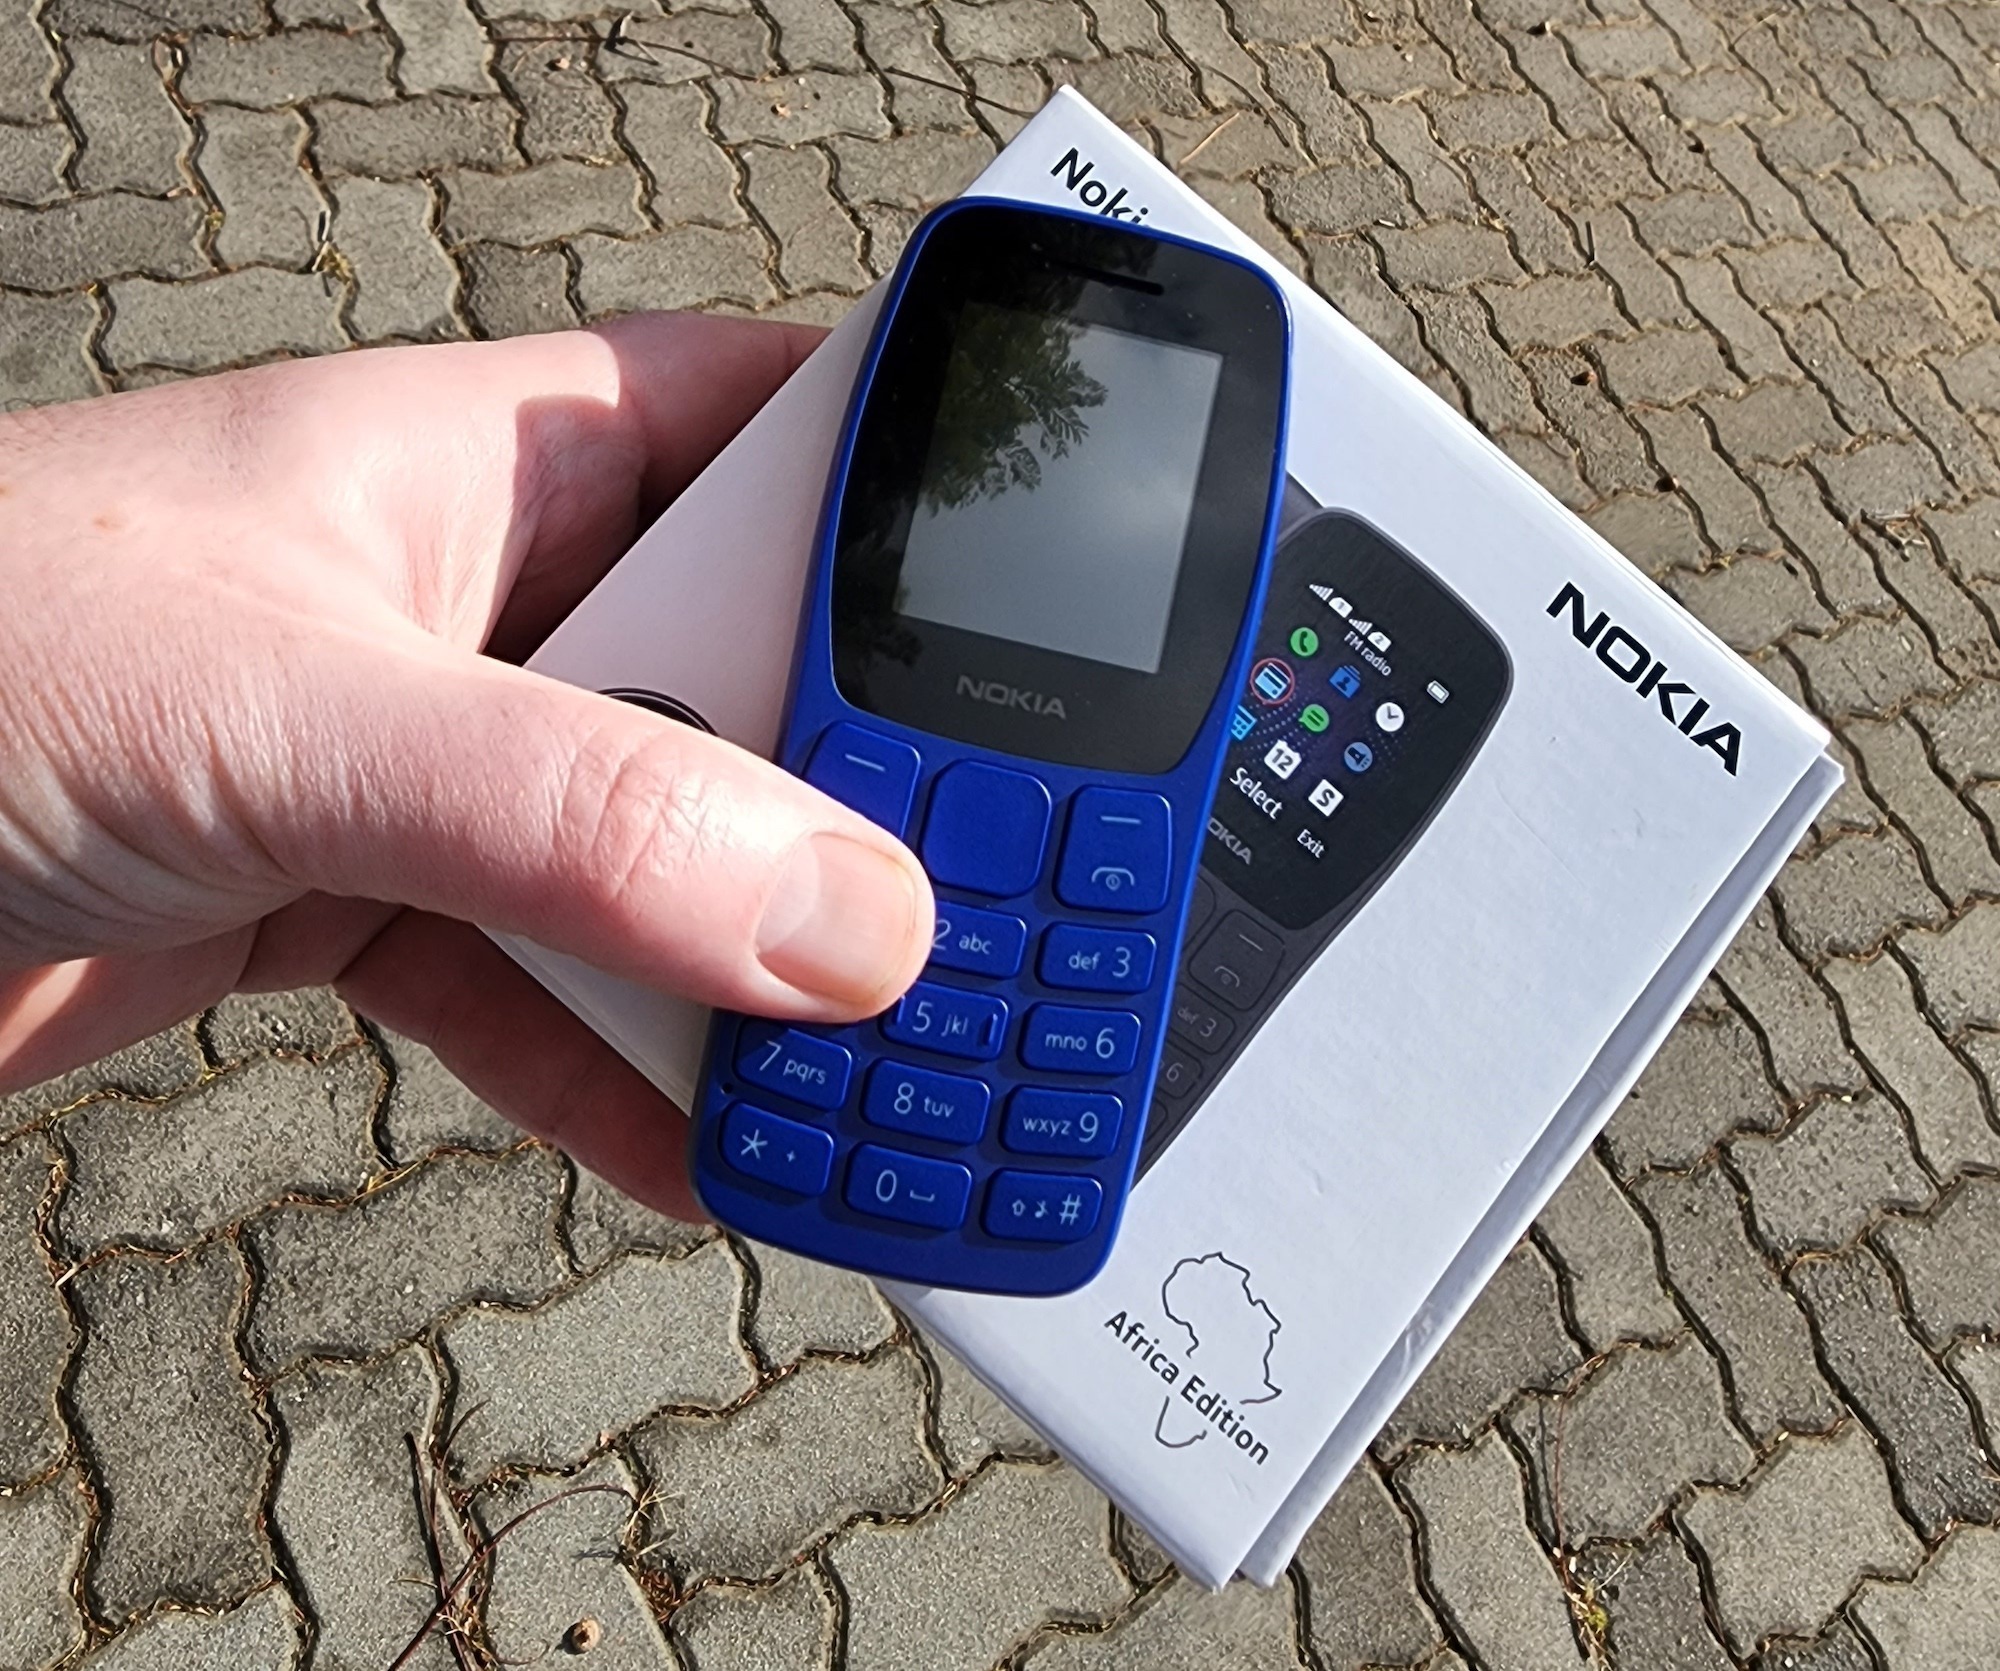 Hands on: Nokia 105 review